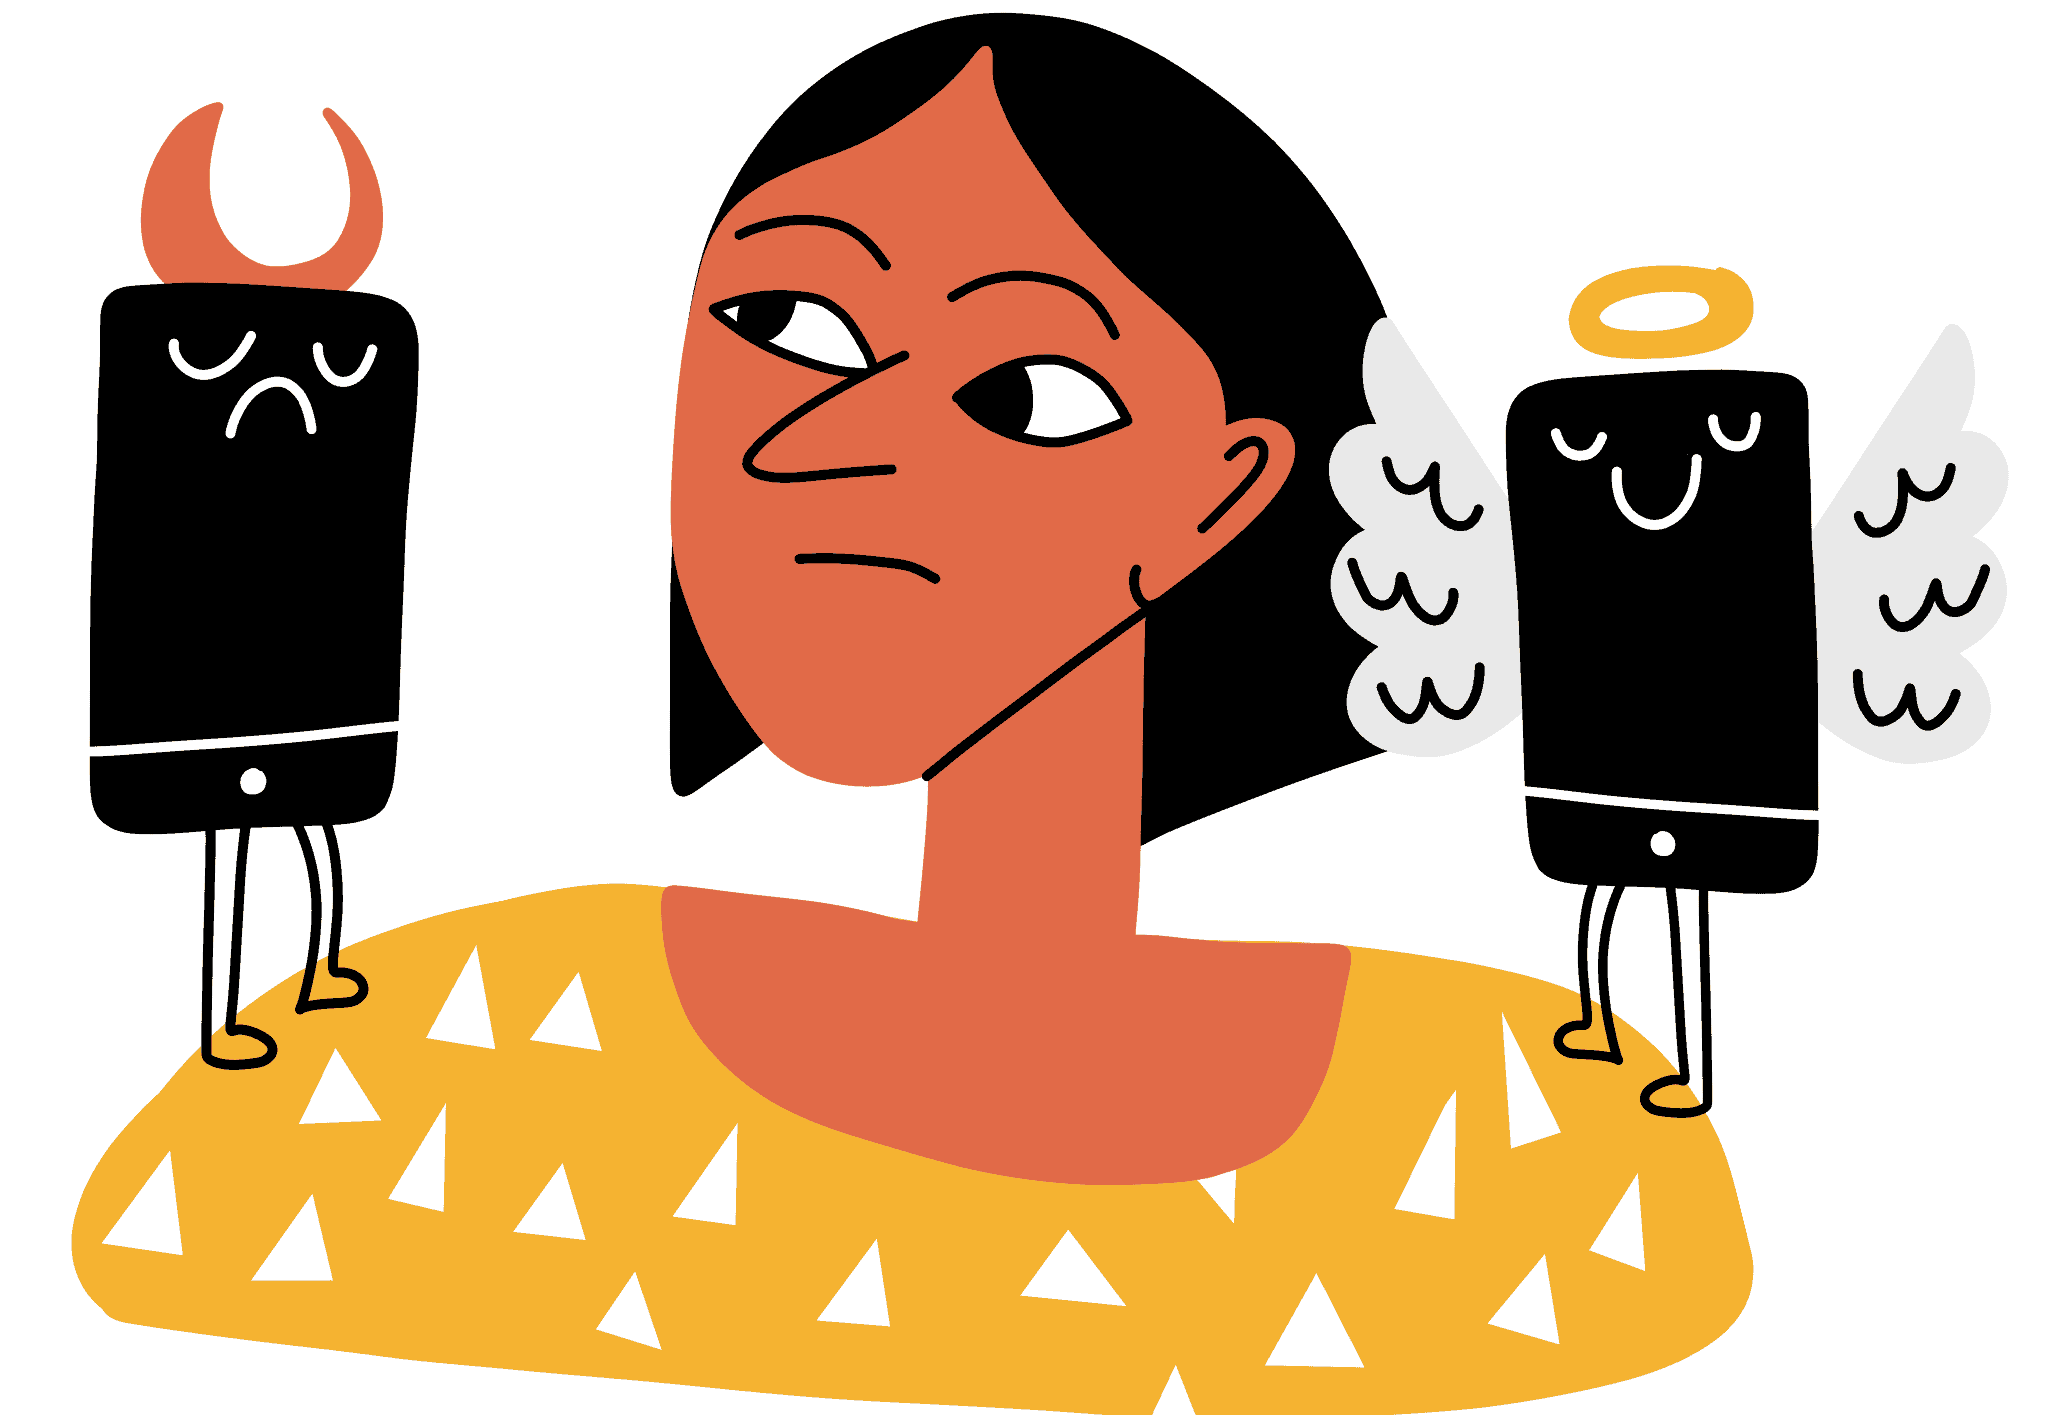 Illustration of a woman focusing on a cartoon devil on one shoulder instead of the angel on the other shoulder, referring to the concept of negativity bias where one is more likely to pay attention to negative effects than positive ones.